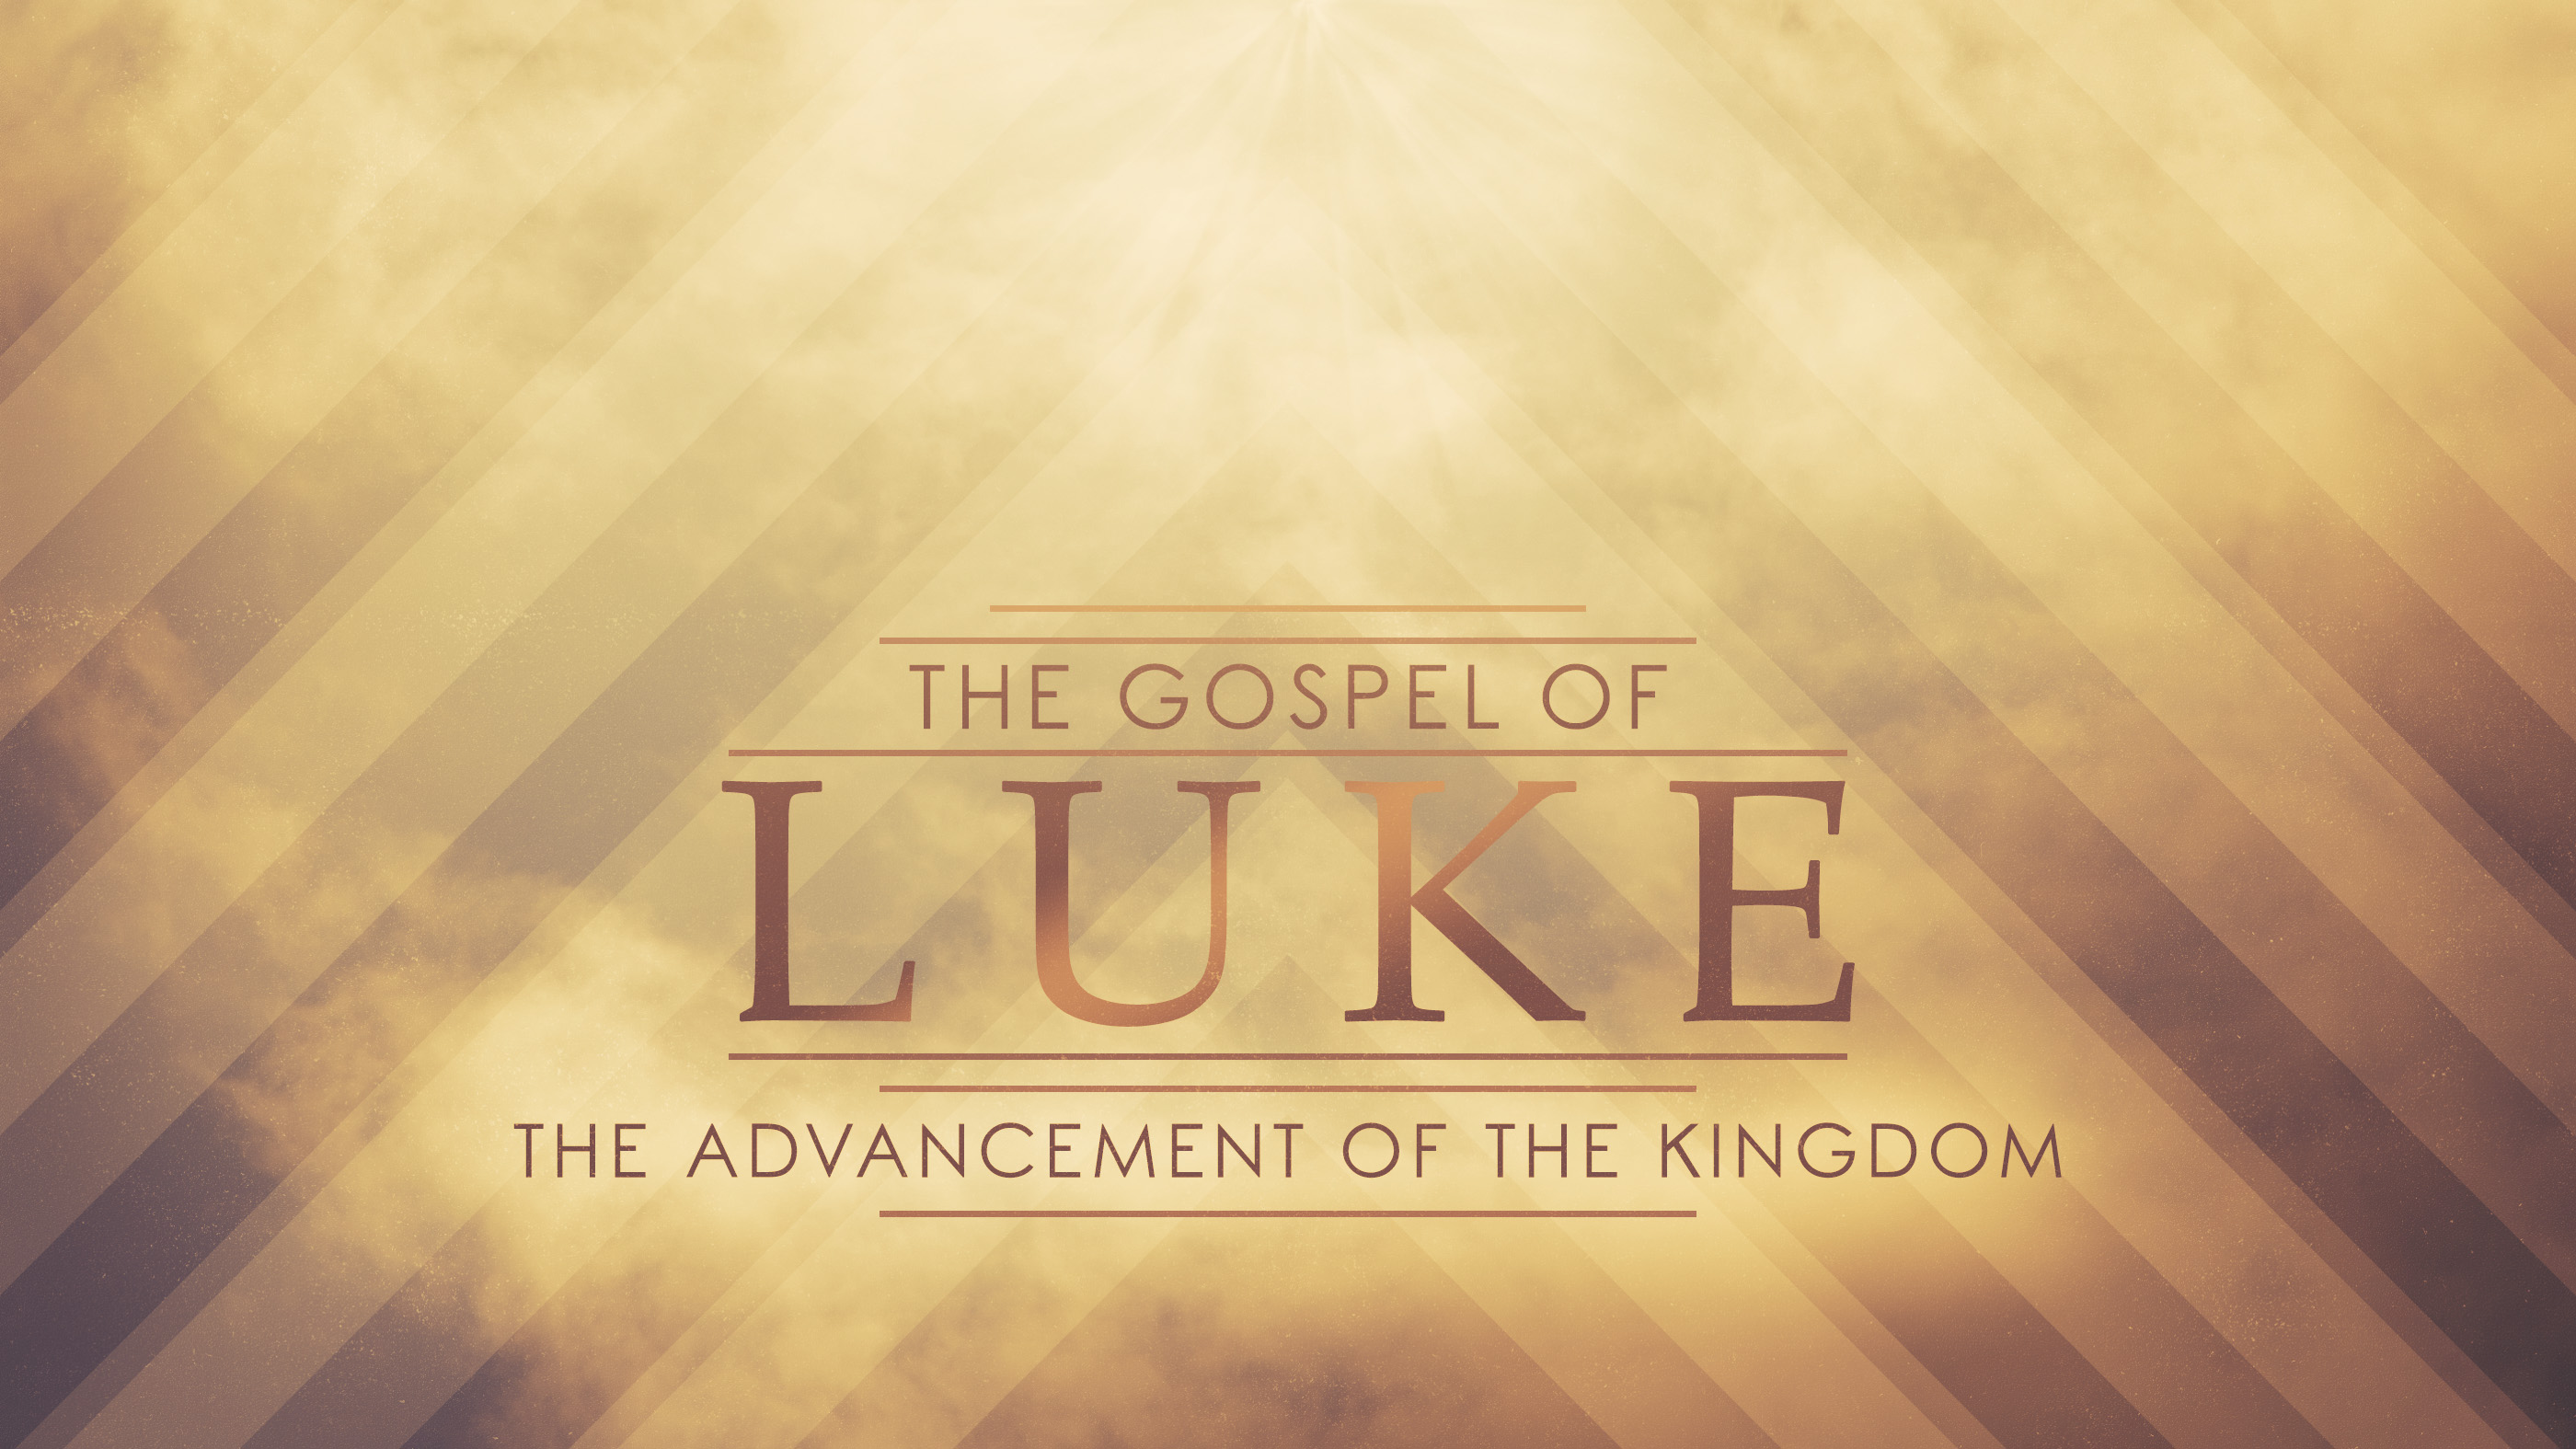 The Advancement of the Kingdom